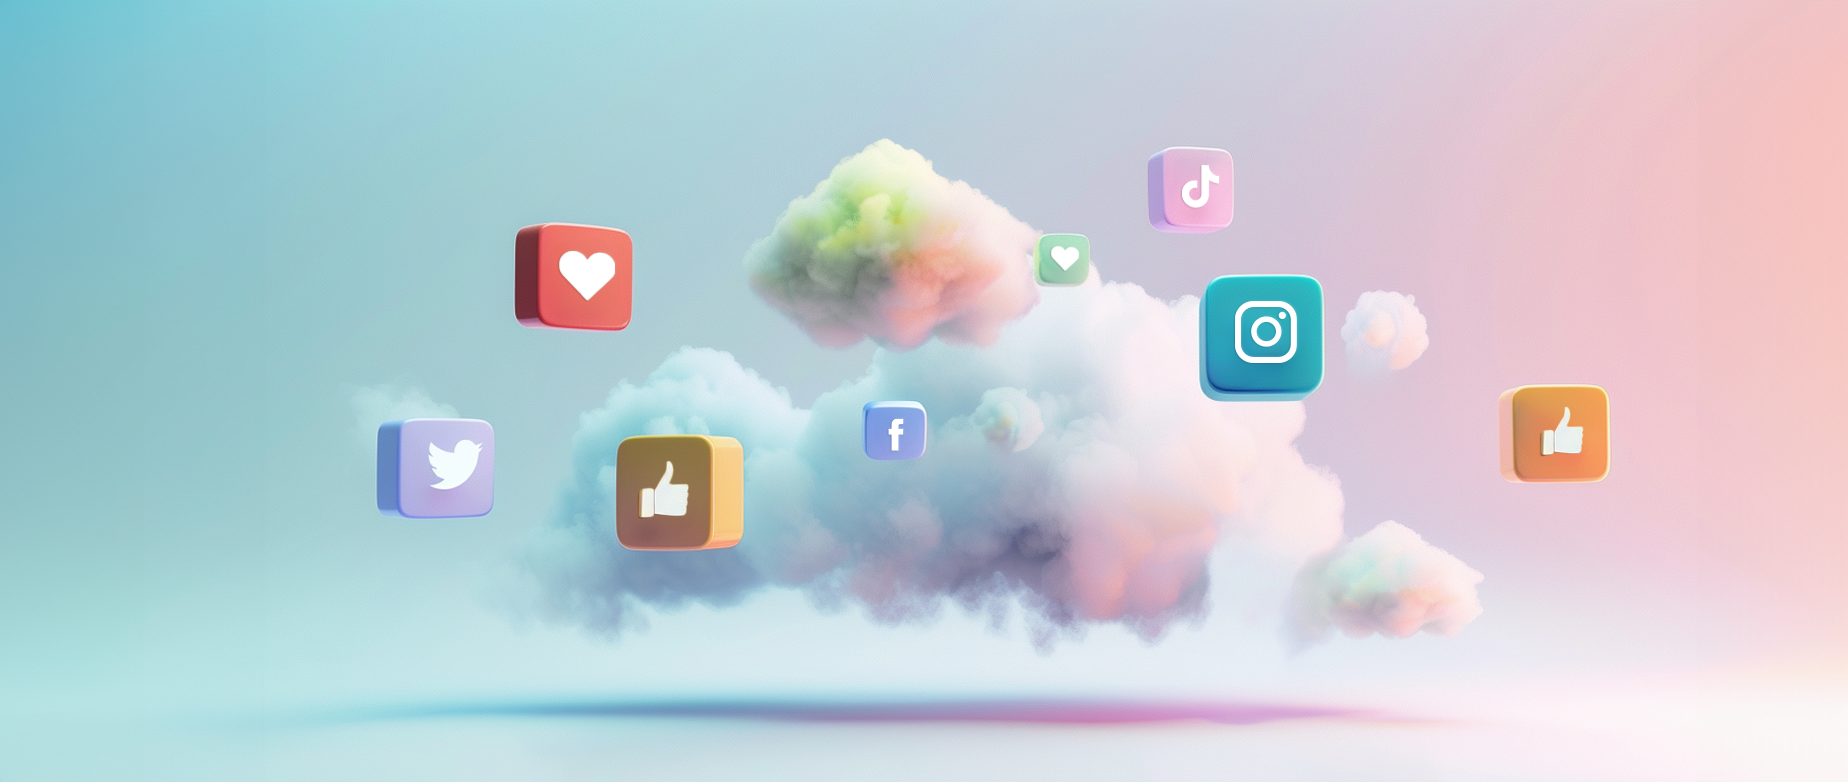 A cloud with social media logos floating around it on a blue and pink background.